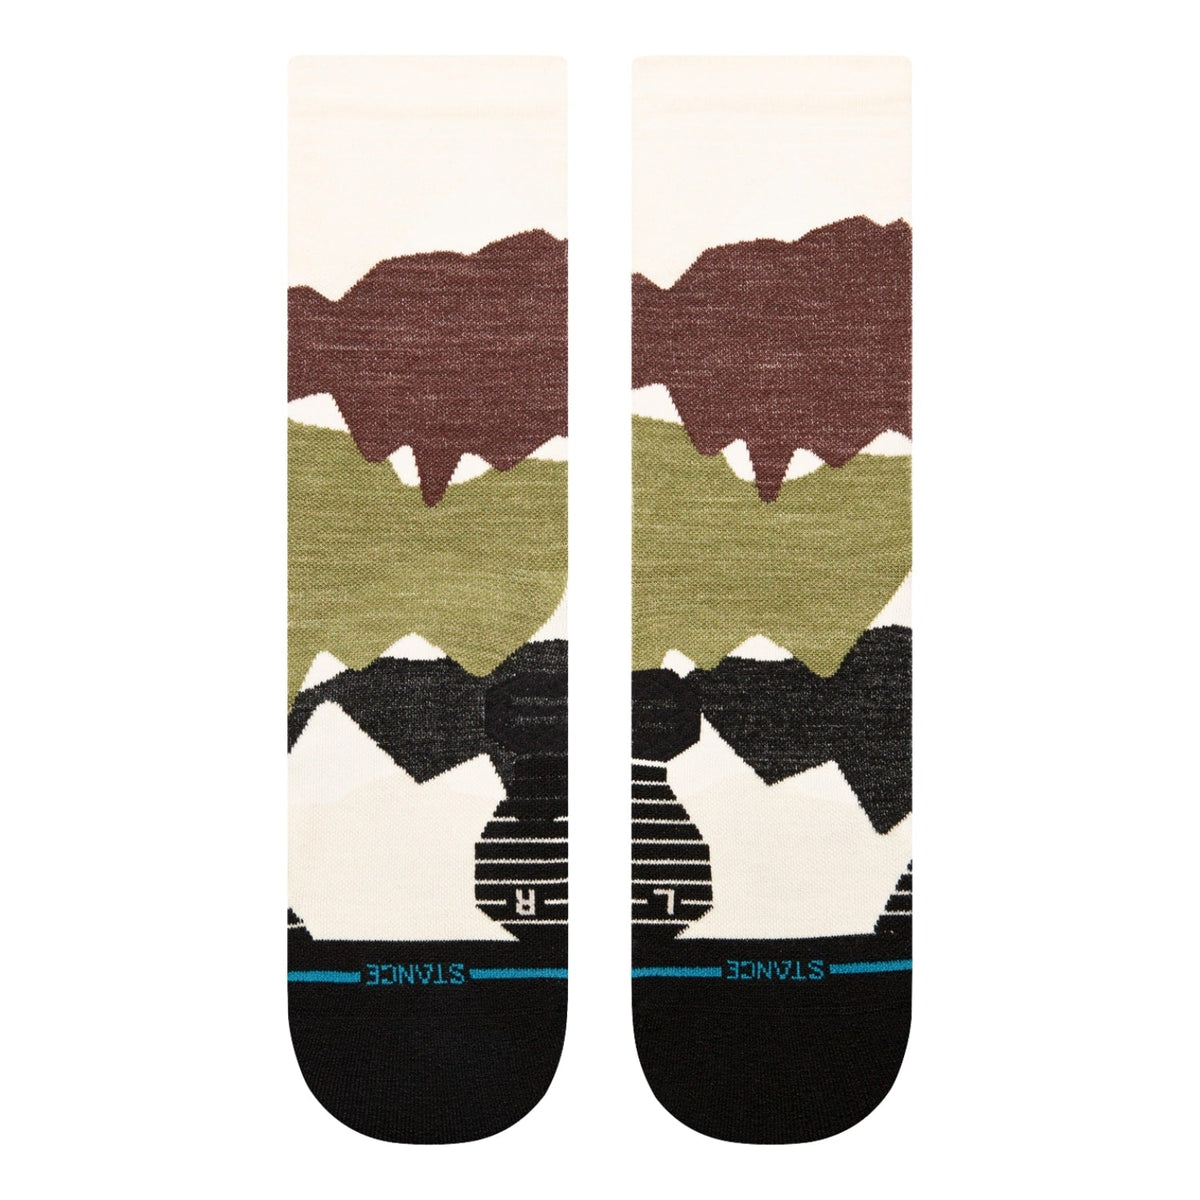 Stance Elevation Crew Sock - Brown - Unisex Crew Length Socks by Stance